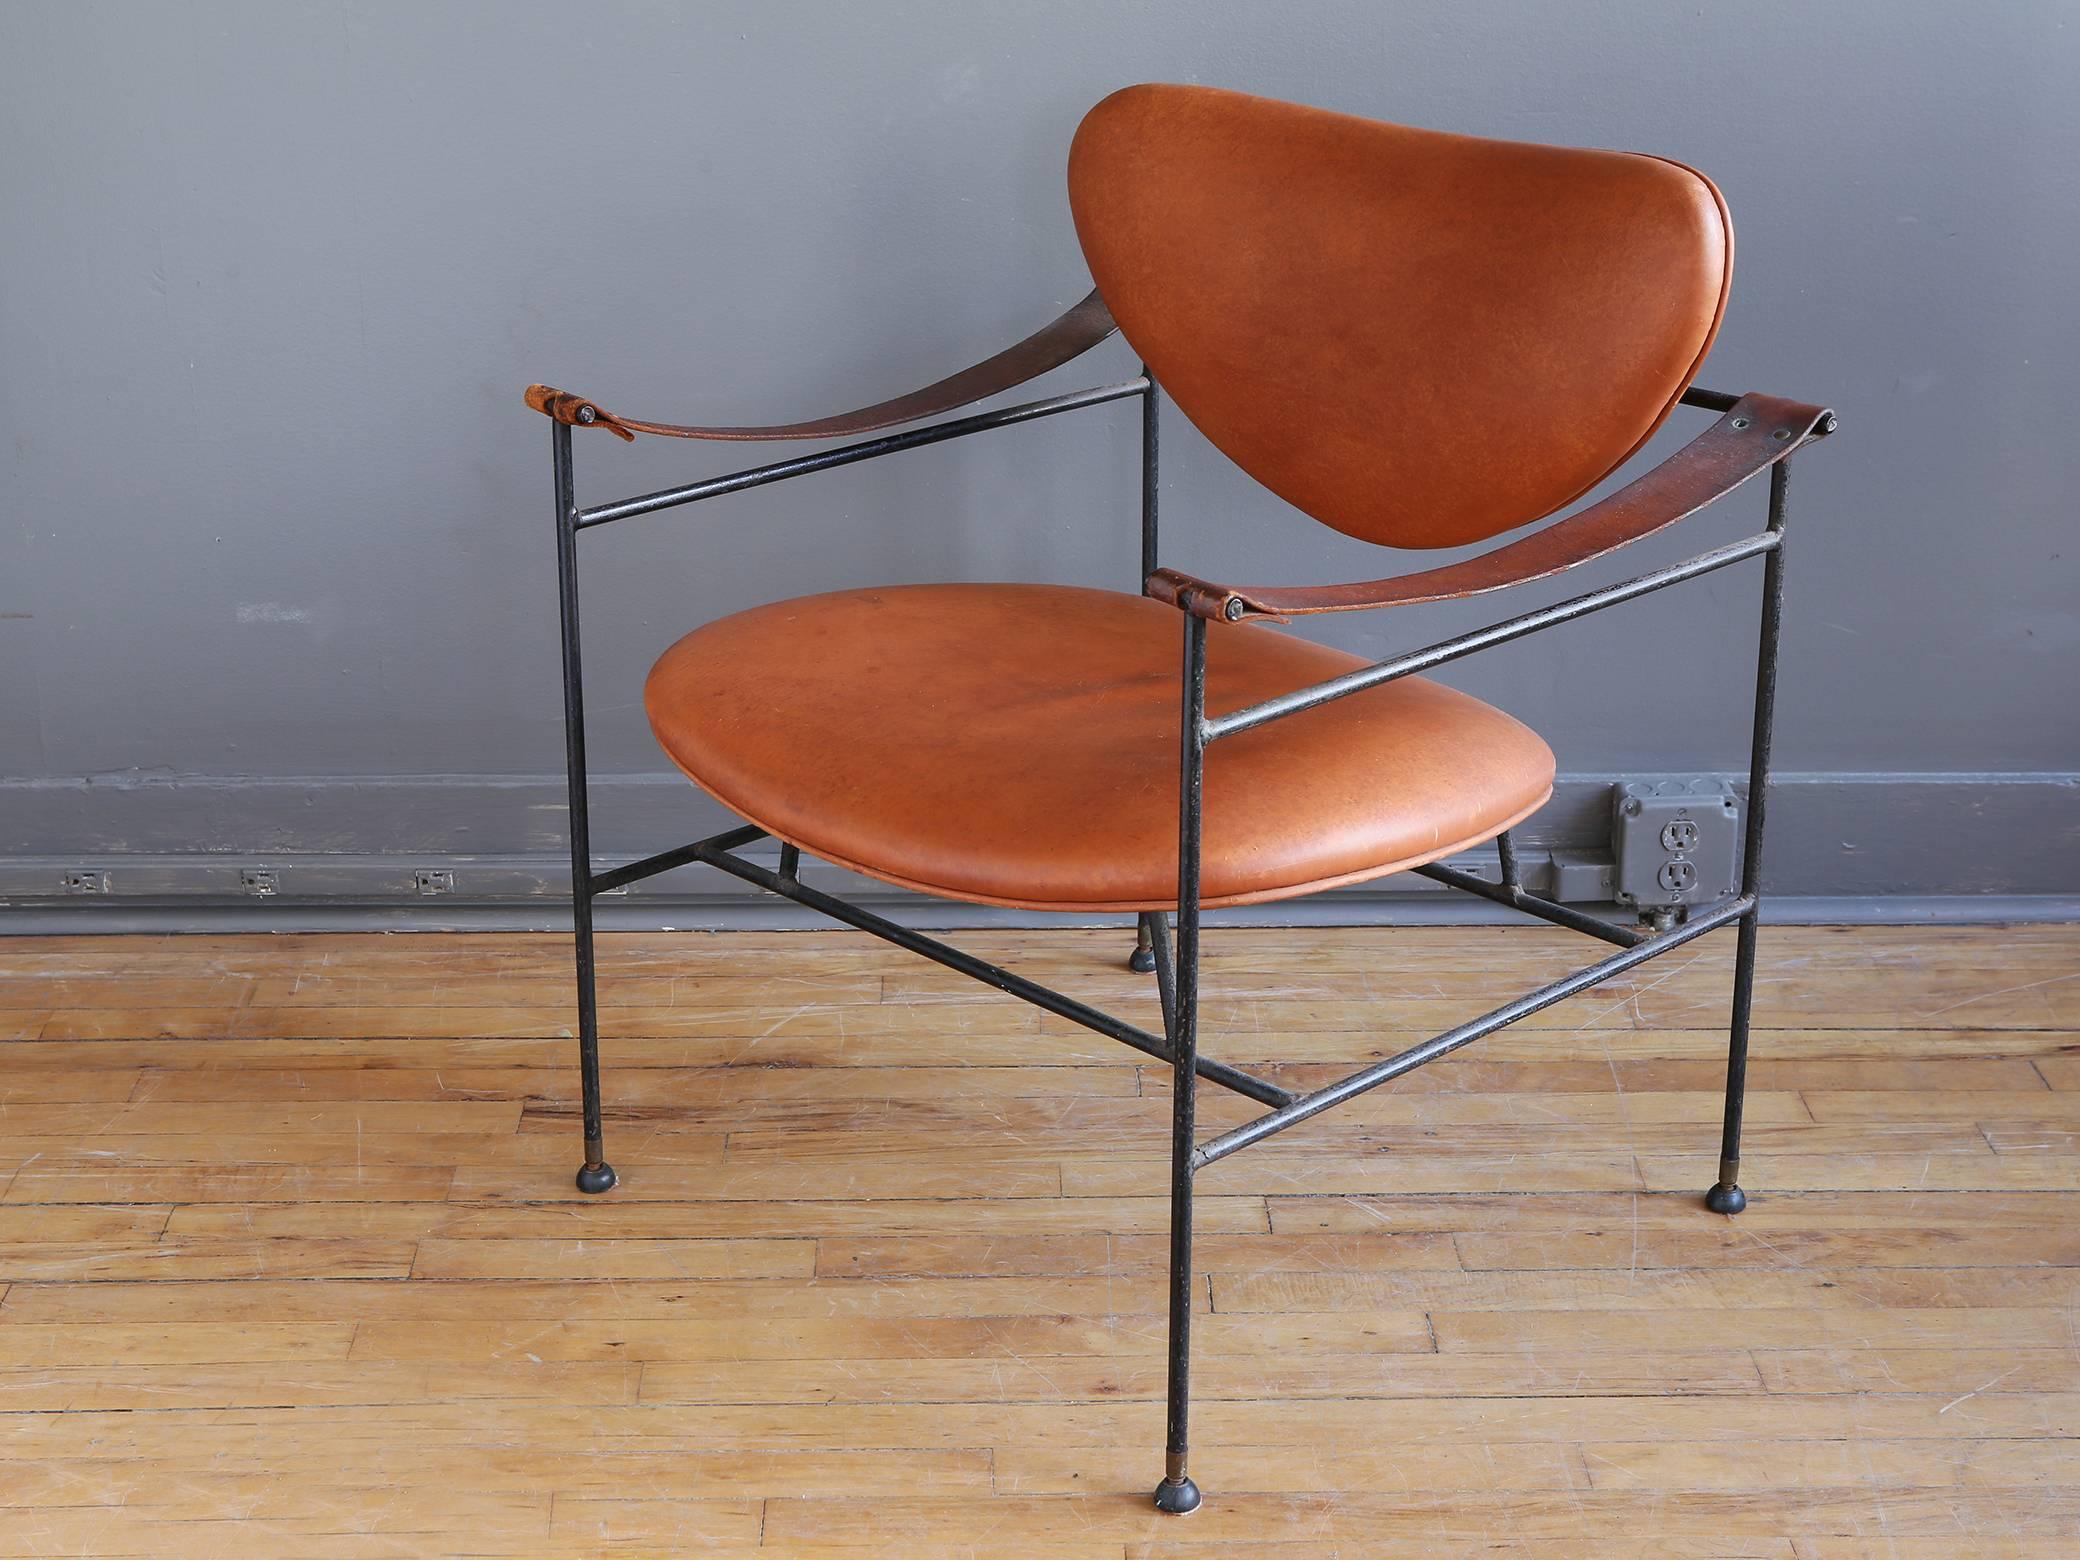 An interesting and sculptural lounge chair in the style of Danish designer Finn Juhl, circa 1950. Featuring a wrought iron frame with seat and back cushions upholstered in distressed cognac leather. Leather sling armrests show a warm patina.